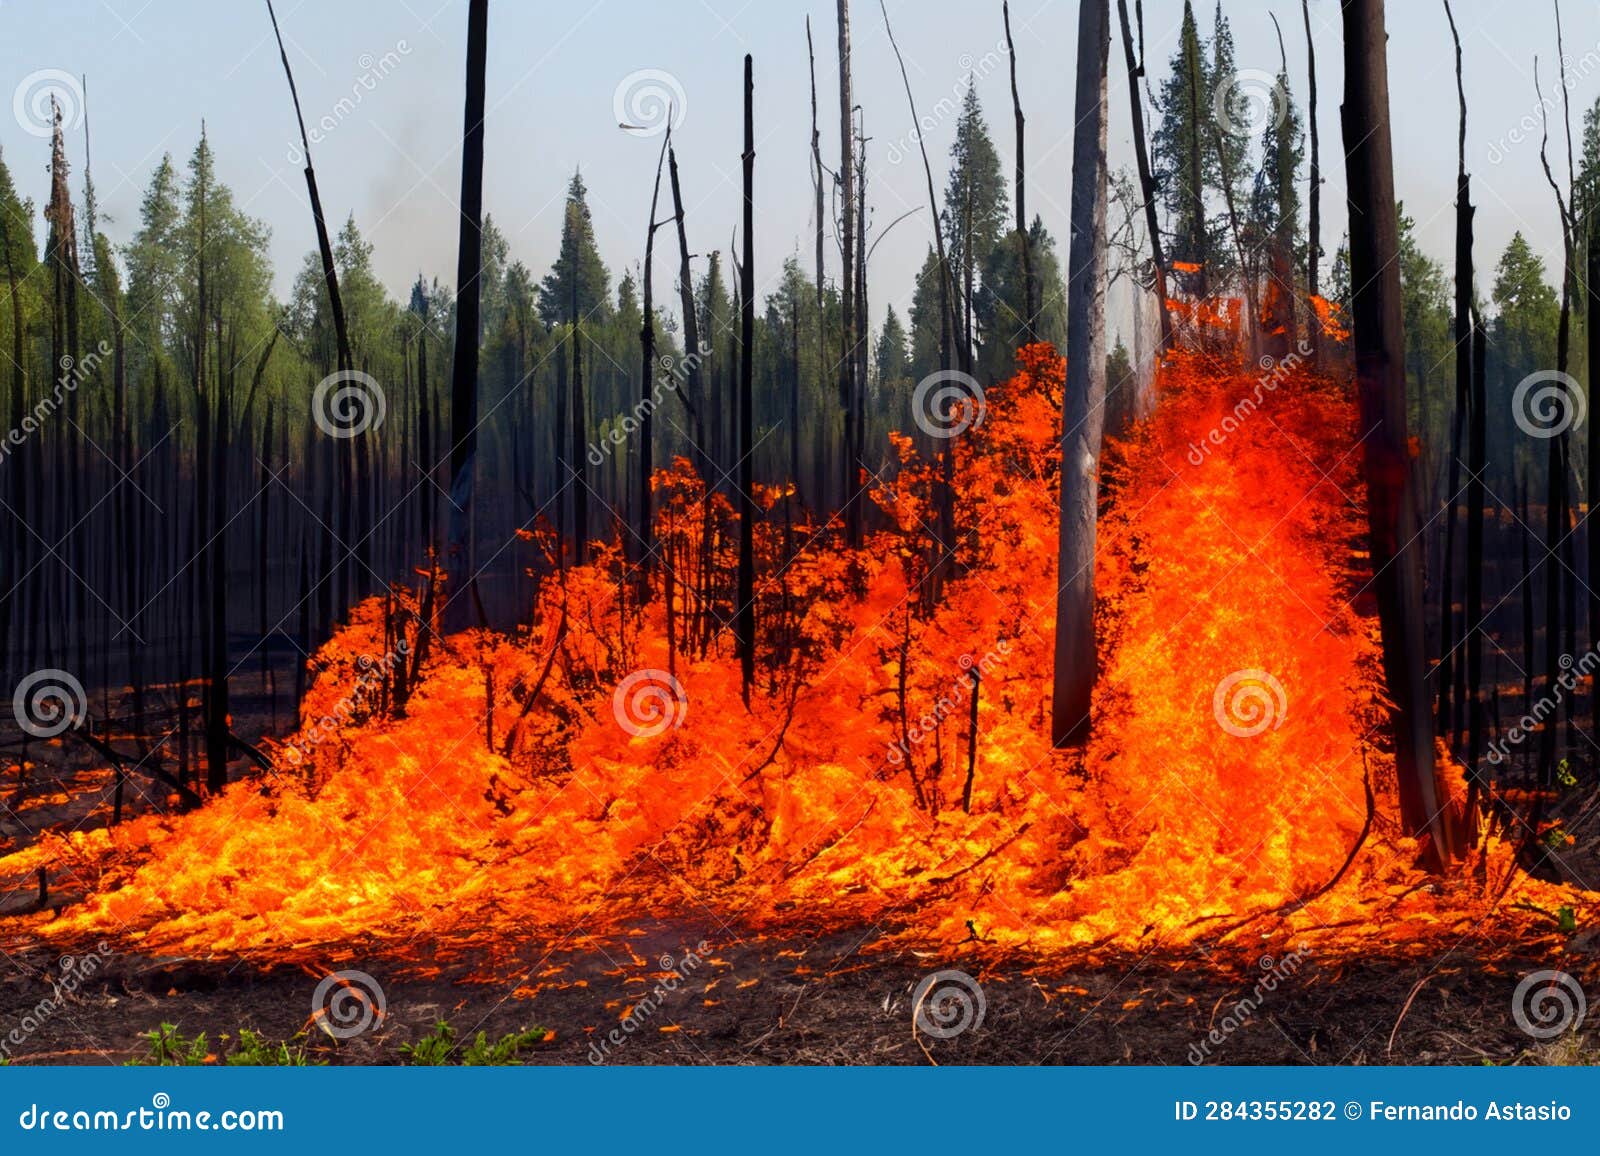 forest fire. forest fire in progress. wildfire. large flames of forest fire. incendio forestal. canada